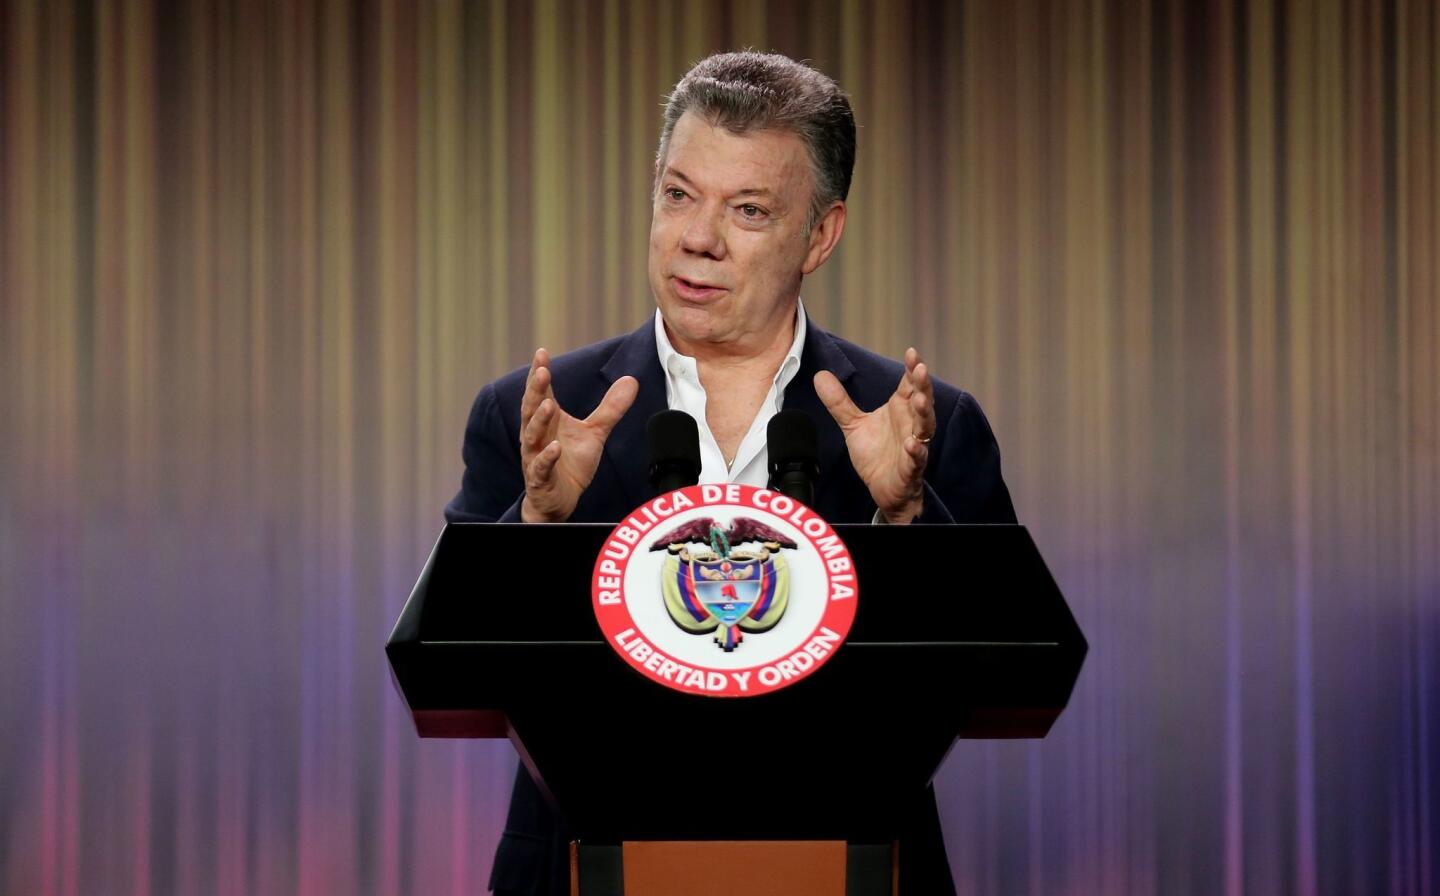 Colombian President Juan Manuel Santos speaks at the inauguration of the One Young World summit in Bogota, Colombia, in October 2017. Santos won the 2016 Peace Prize for his efforts to negotiate a peace treaty with the country's FARC rebel movement.